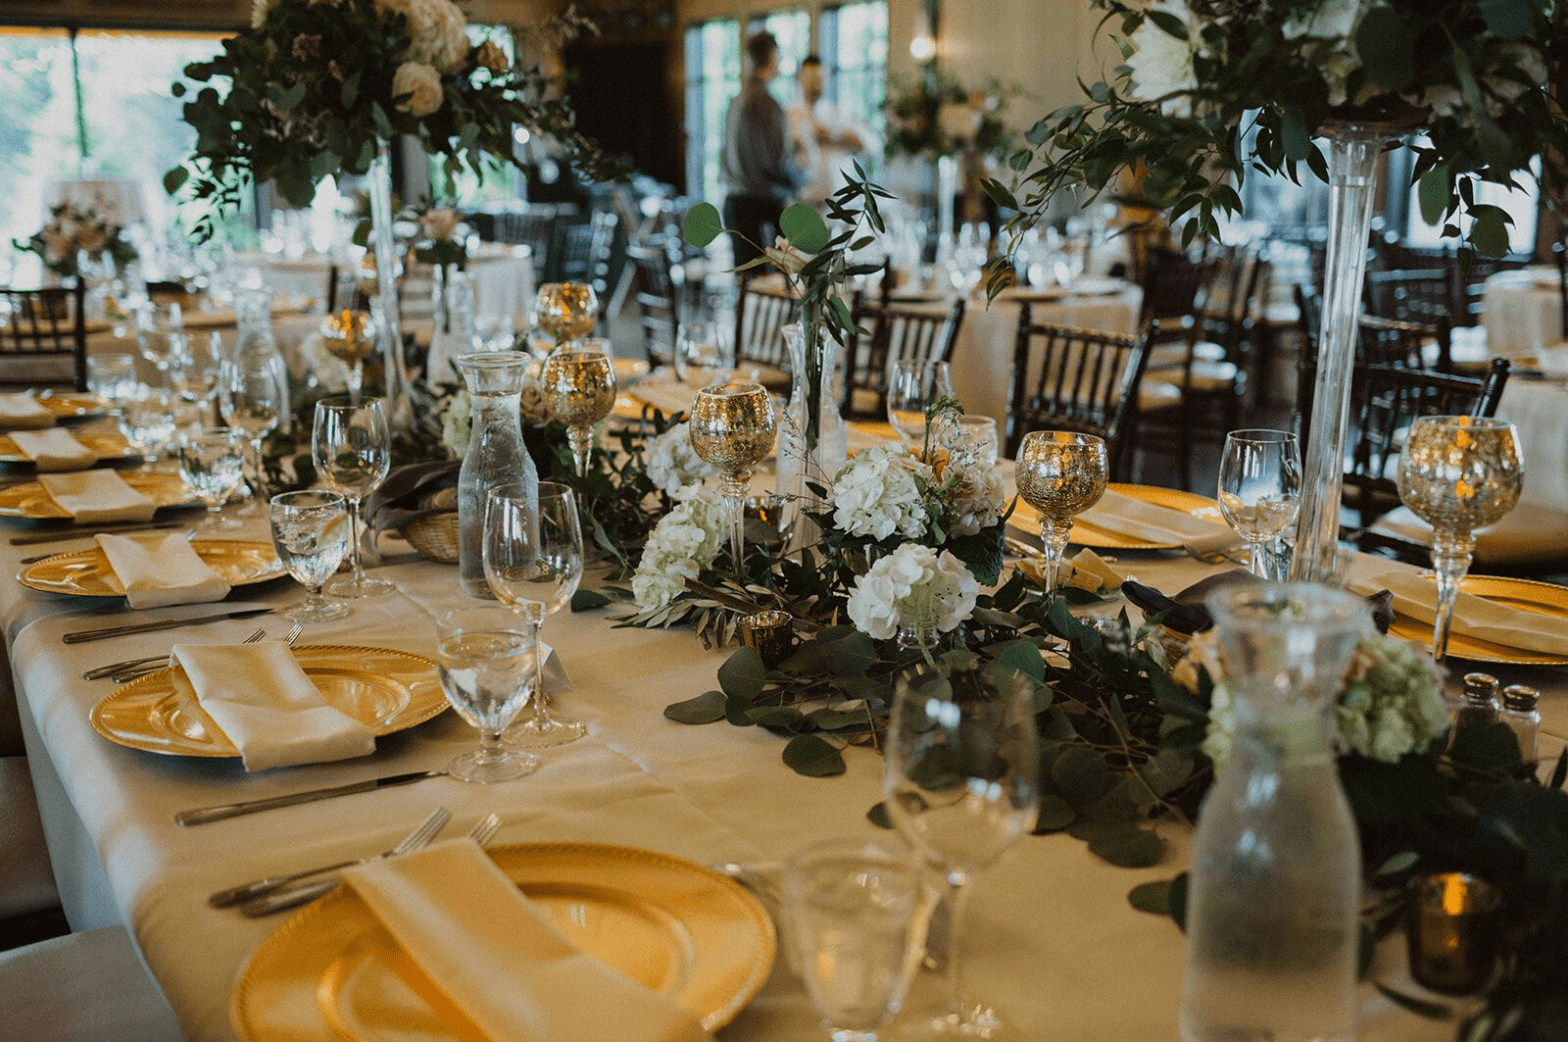 5 flowers that work best for events